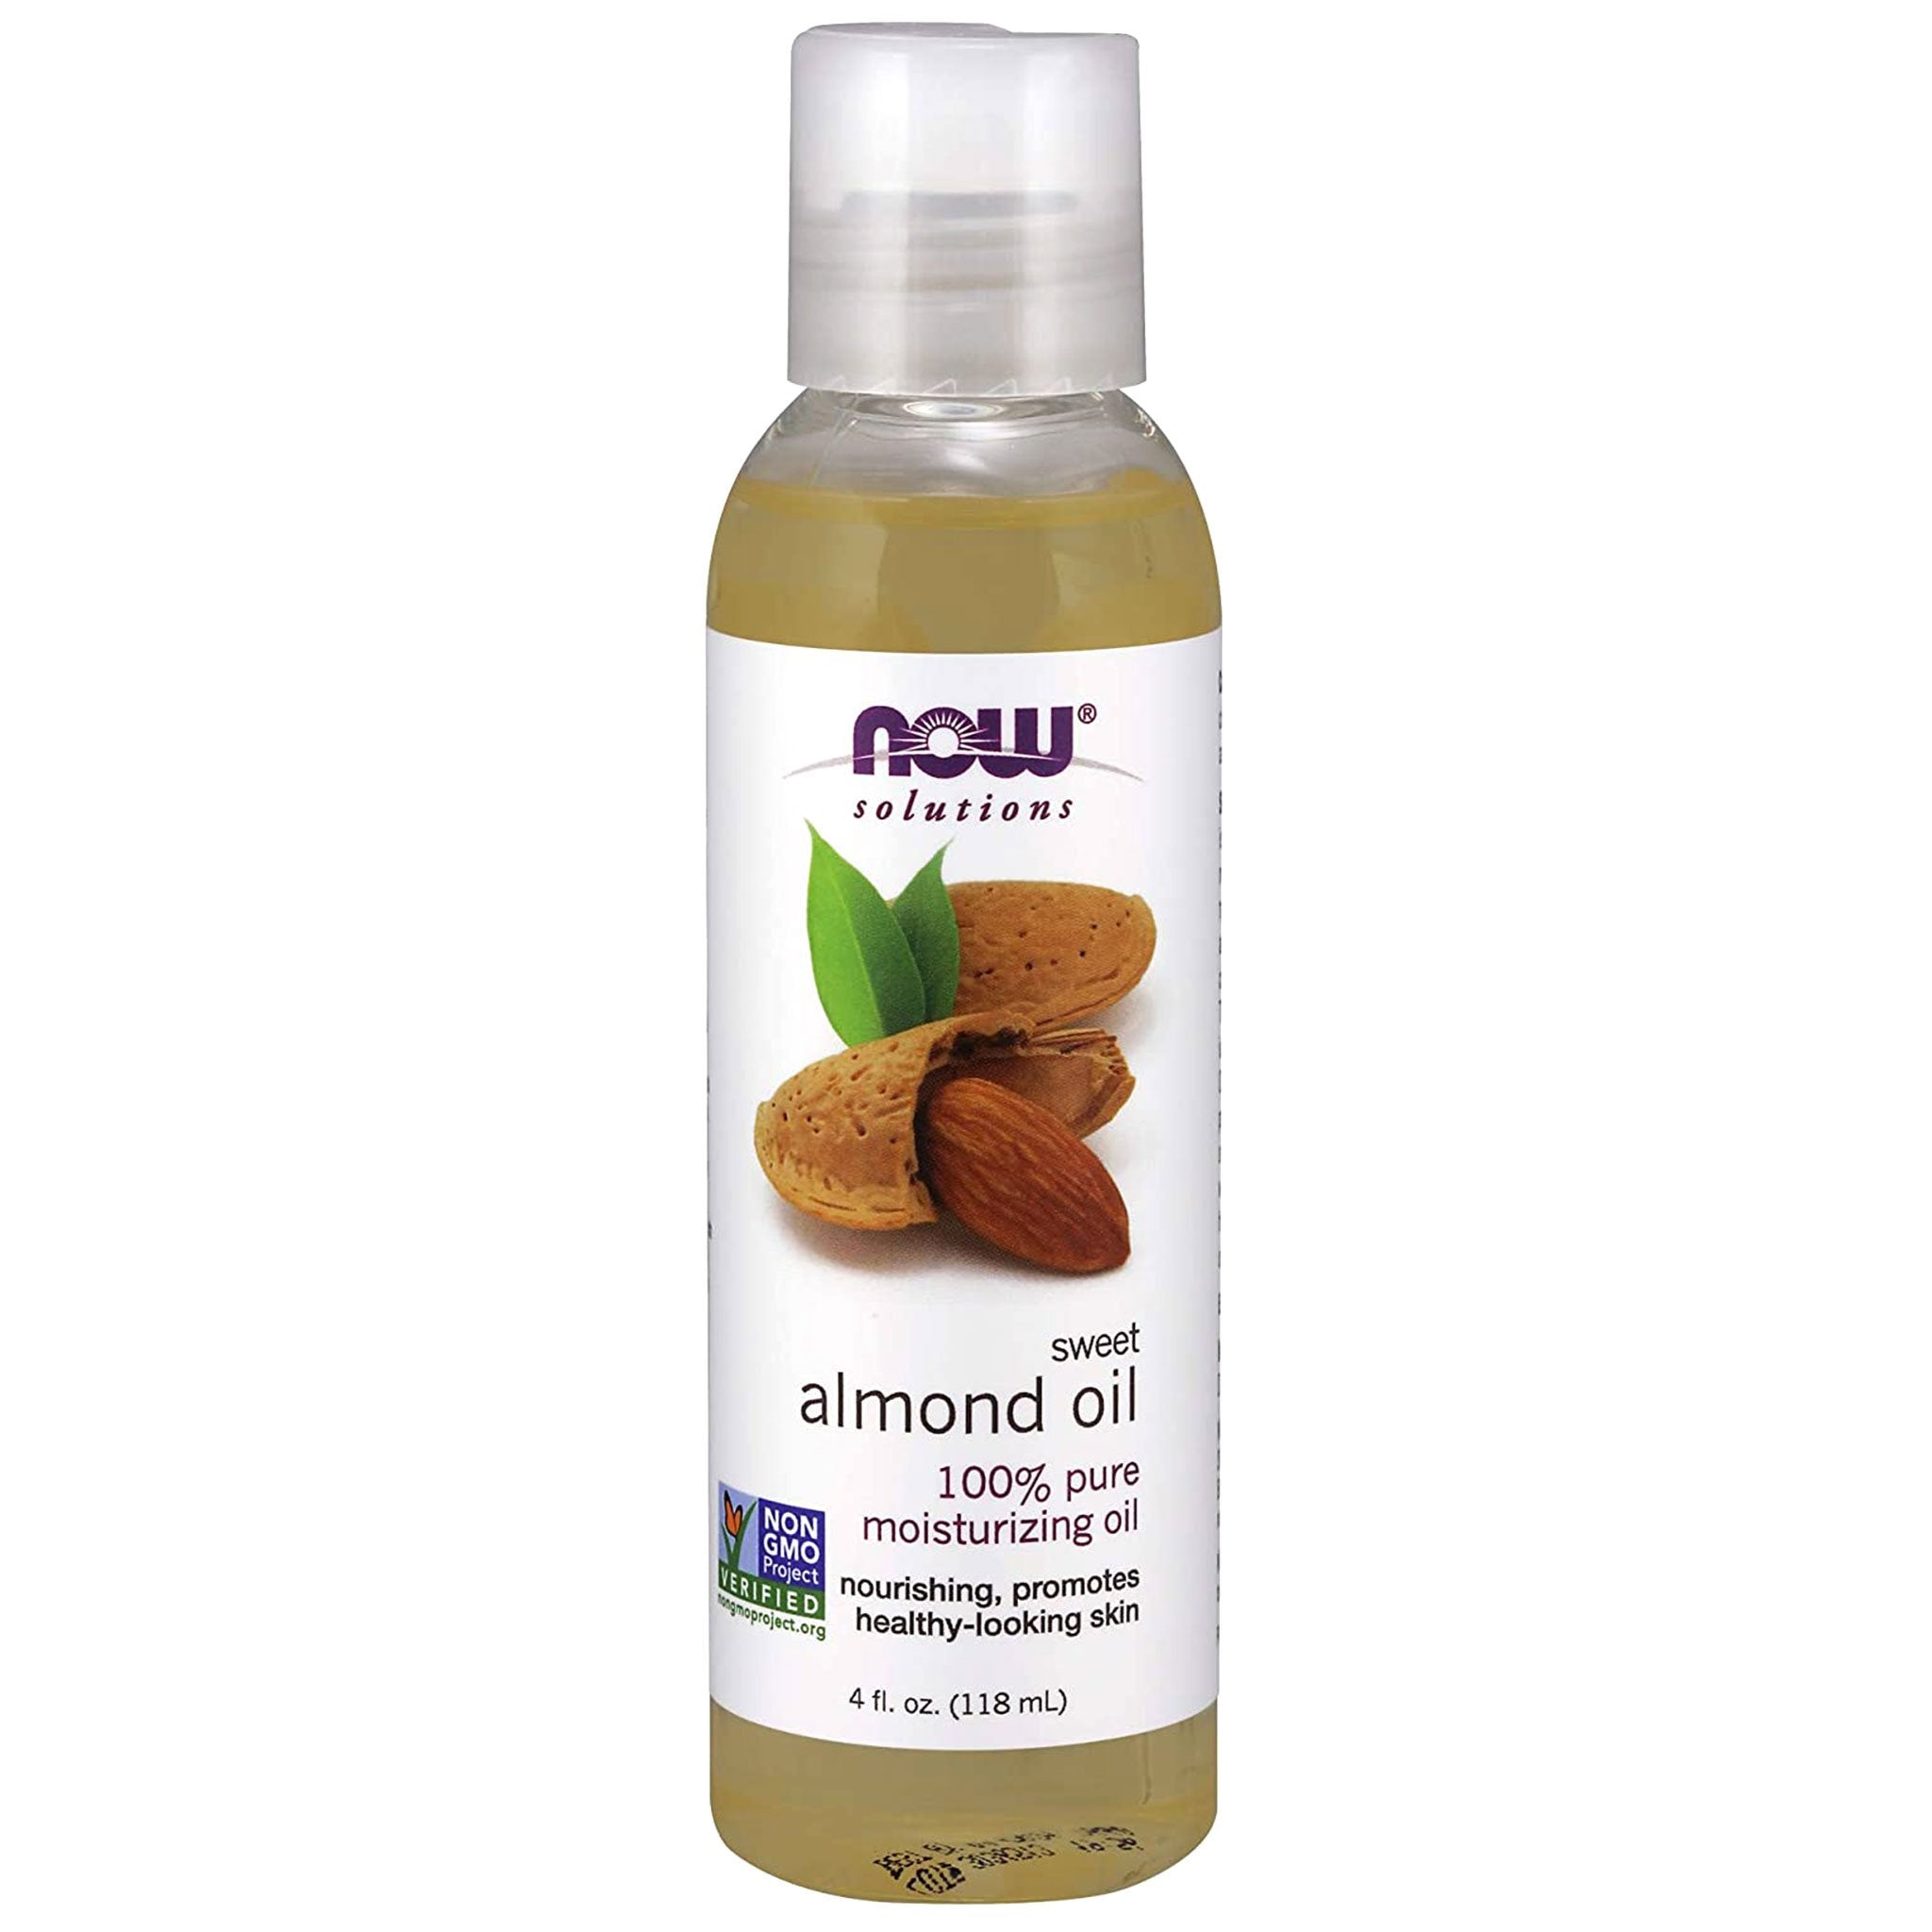 NOW Solutions Almond Oil Sweet 4 oz118ml